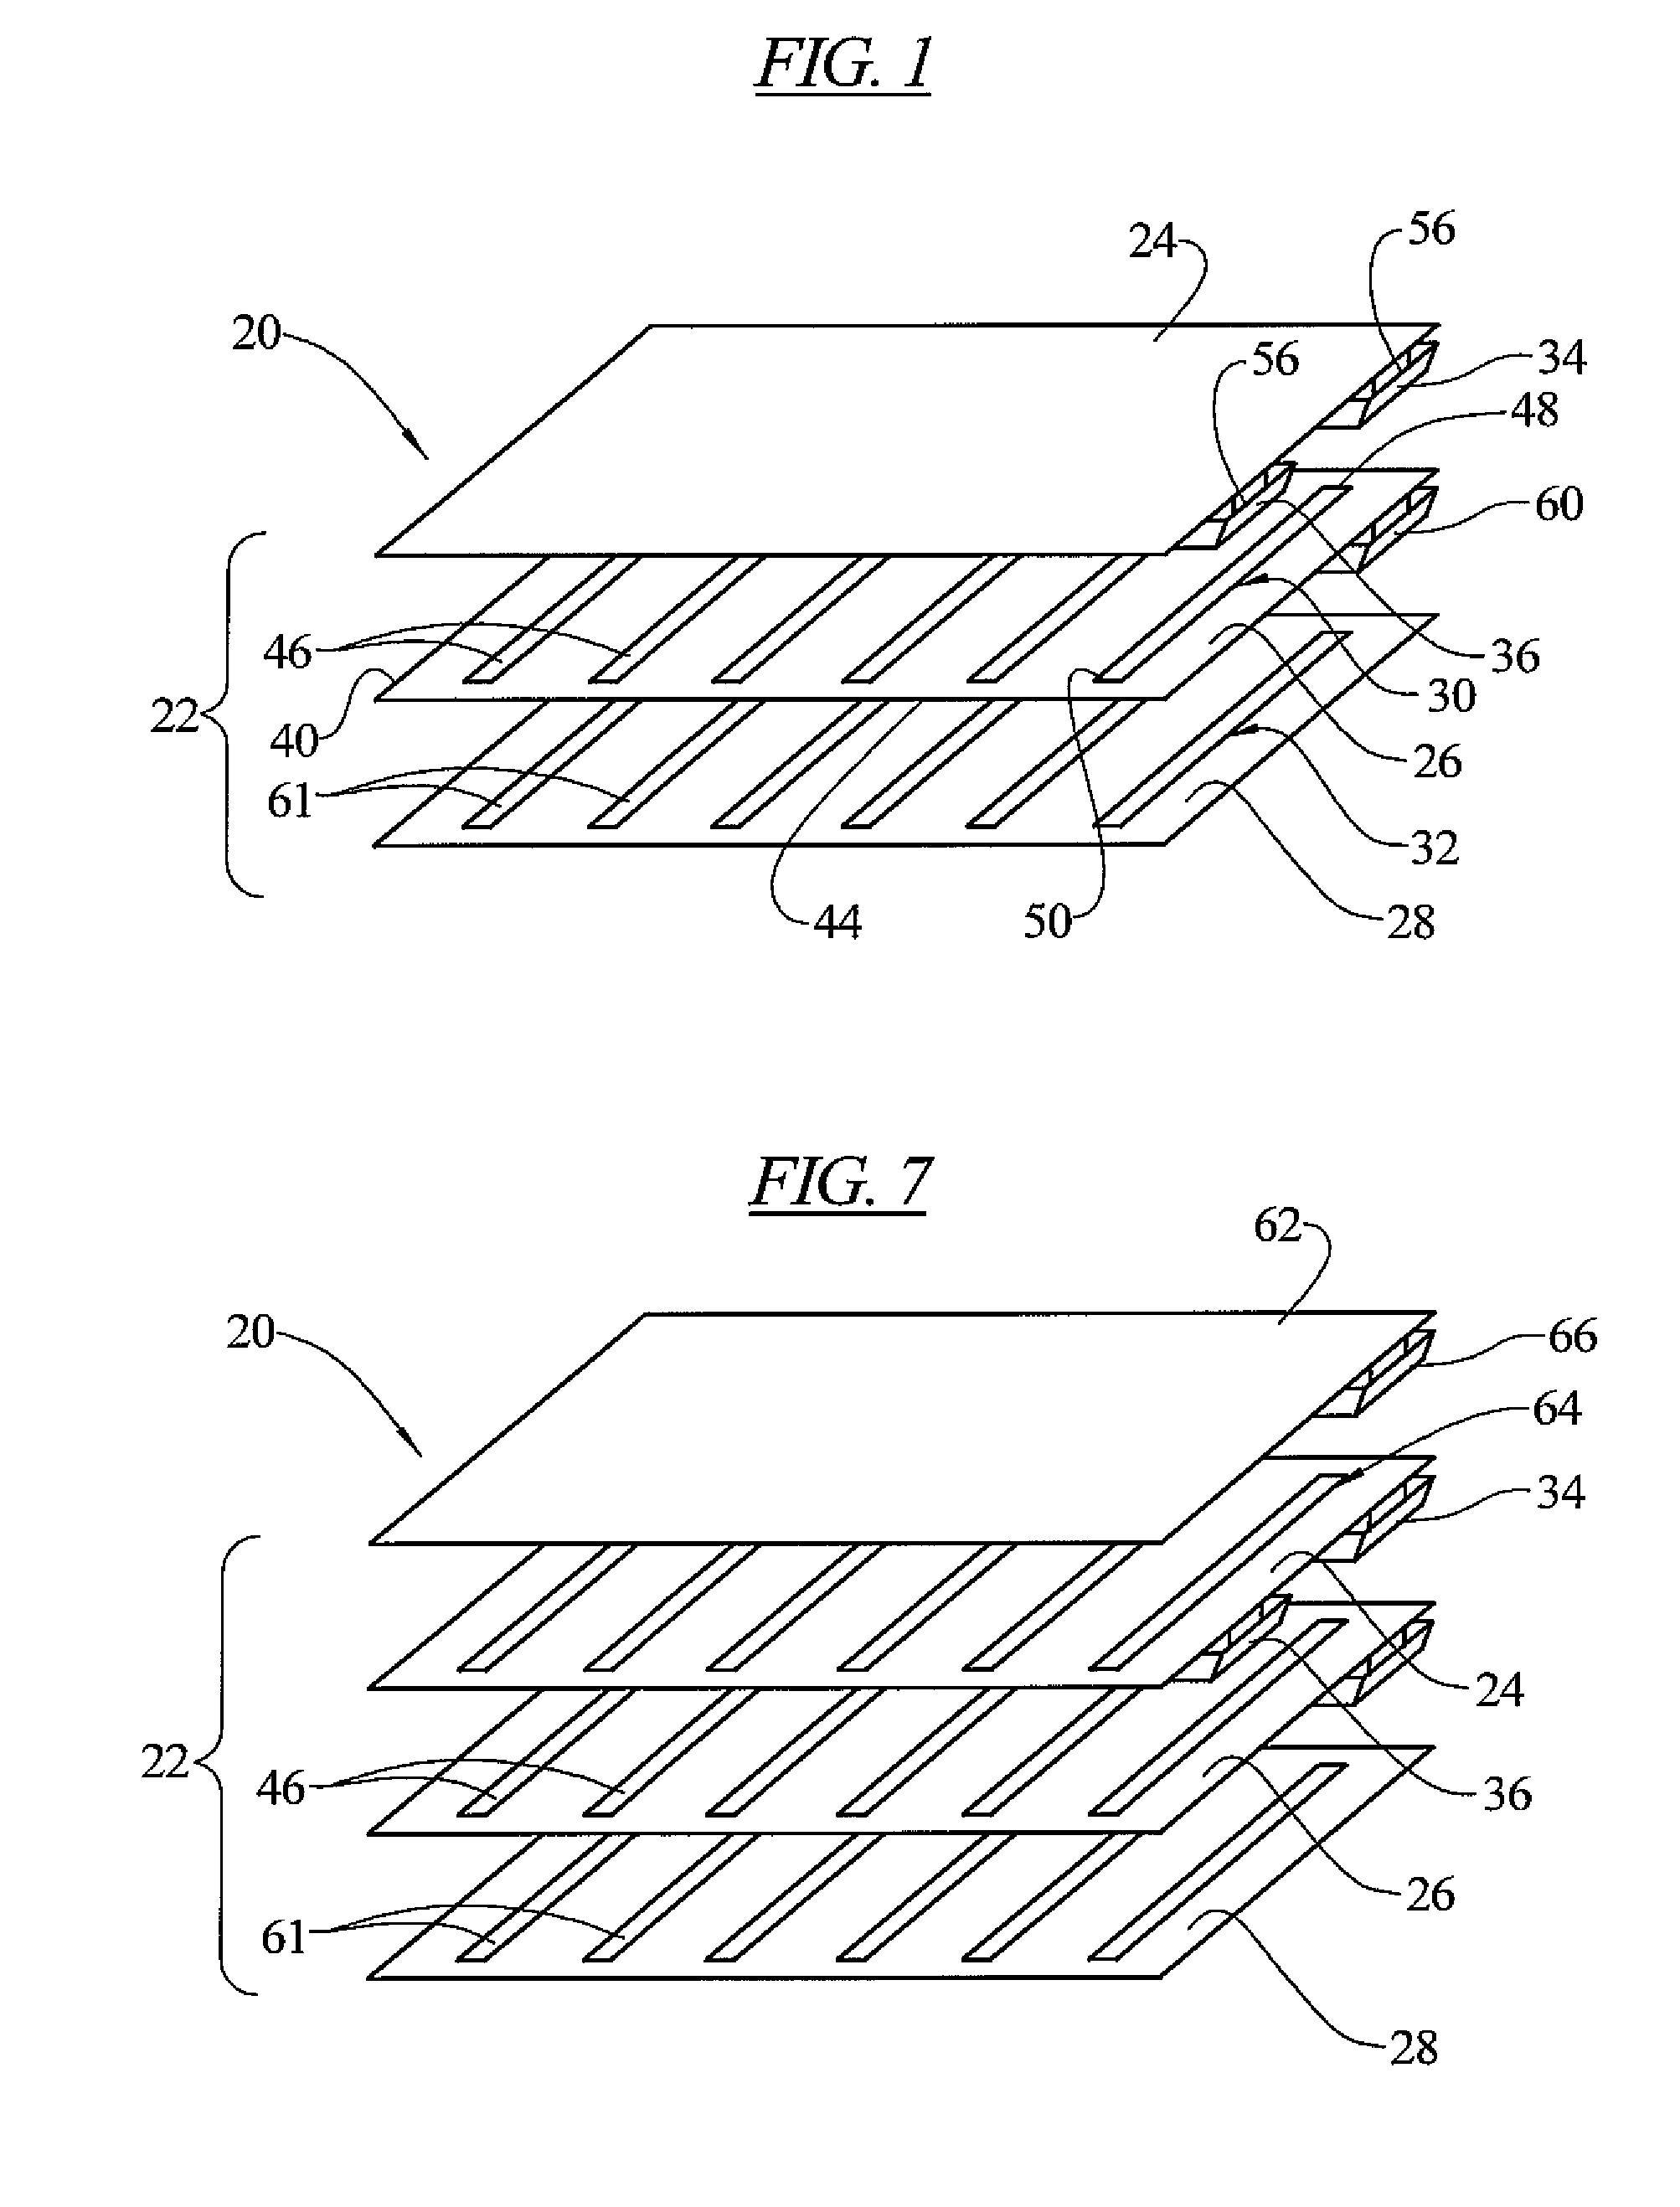 Electrical heater with a resistive neutral plane